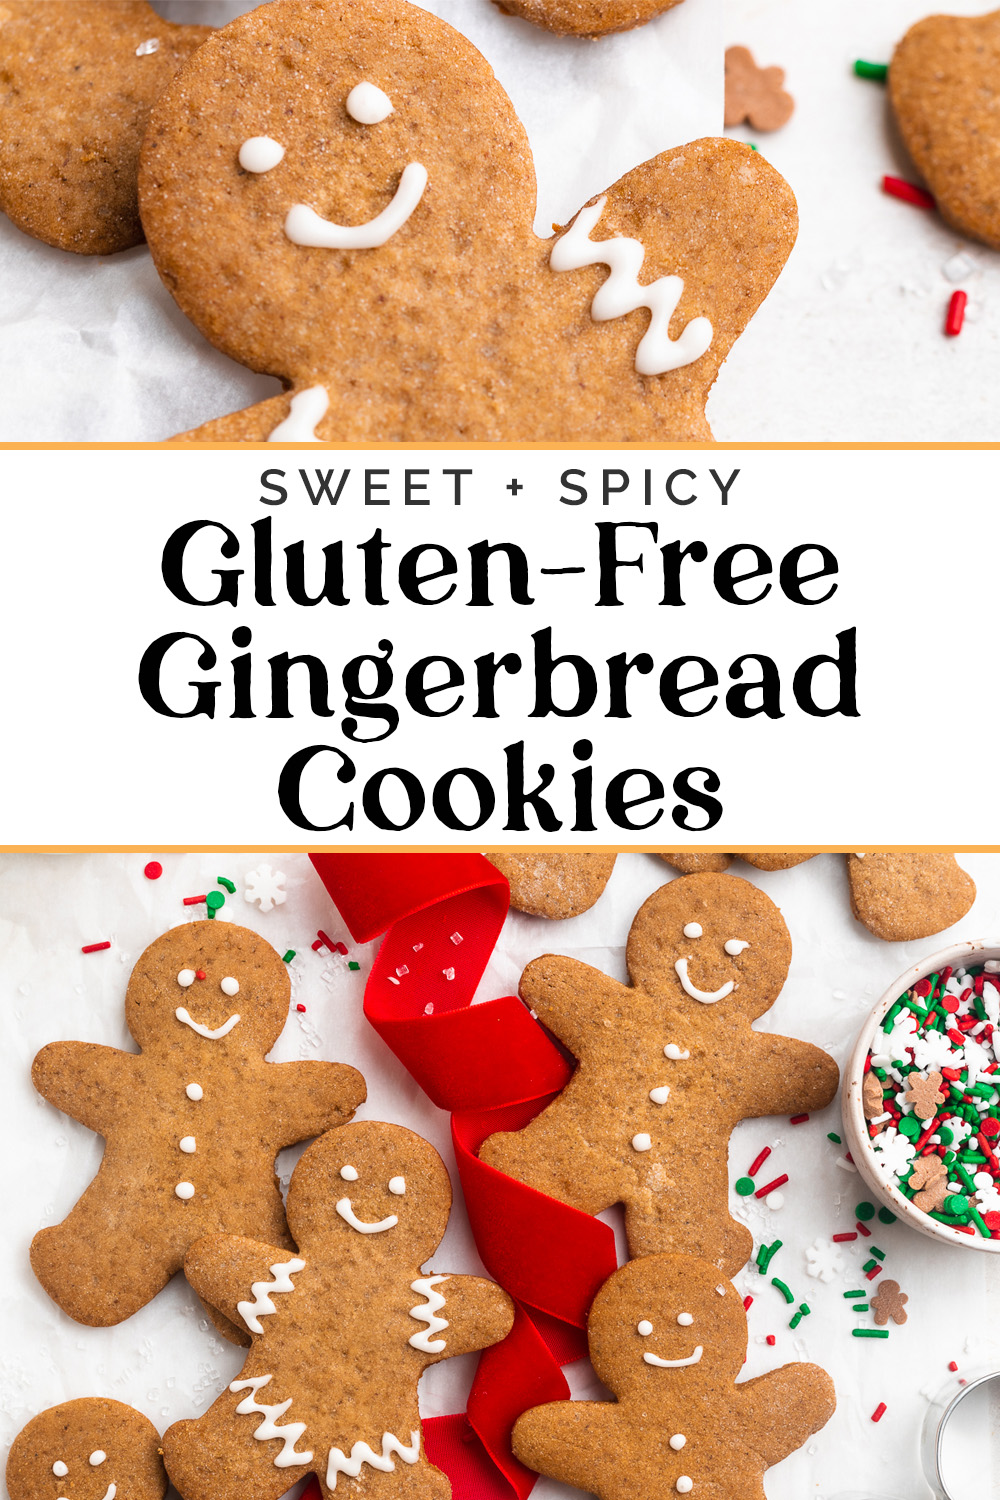 Pin graphic for gluten-free gingerbread cookies.